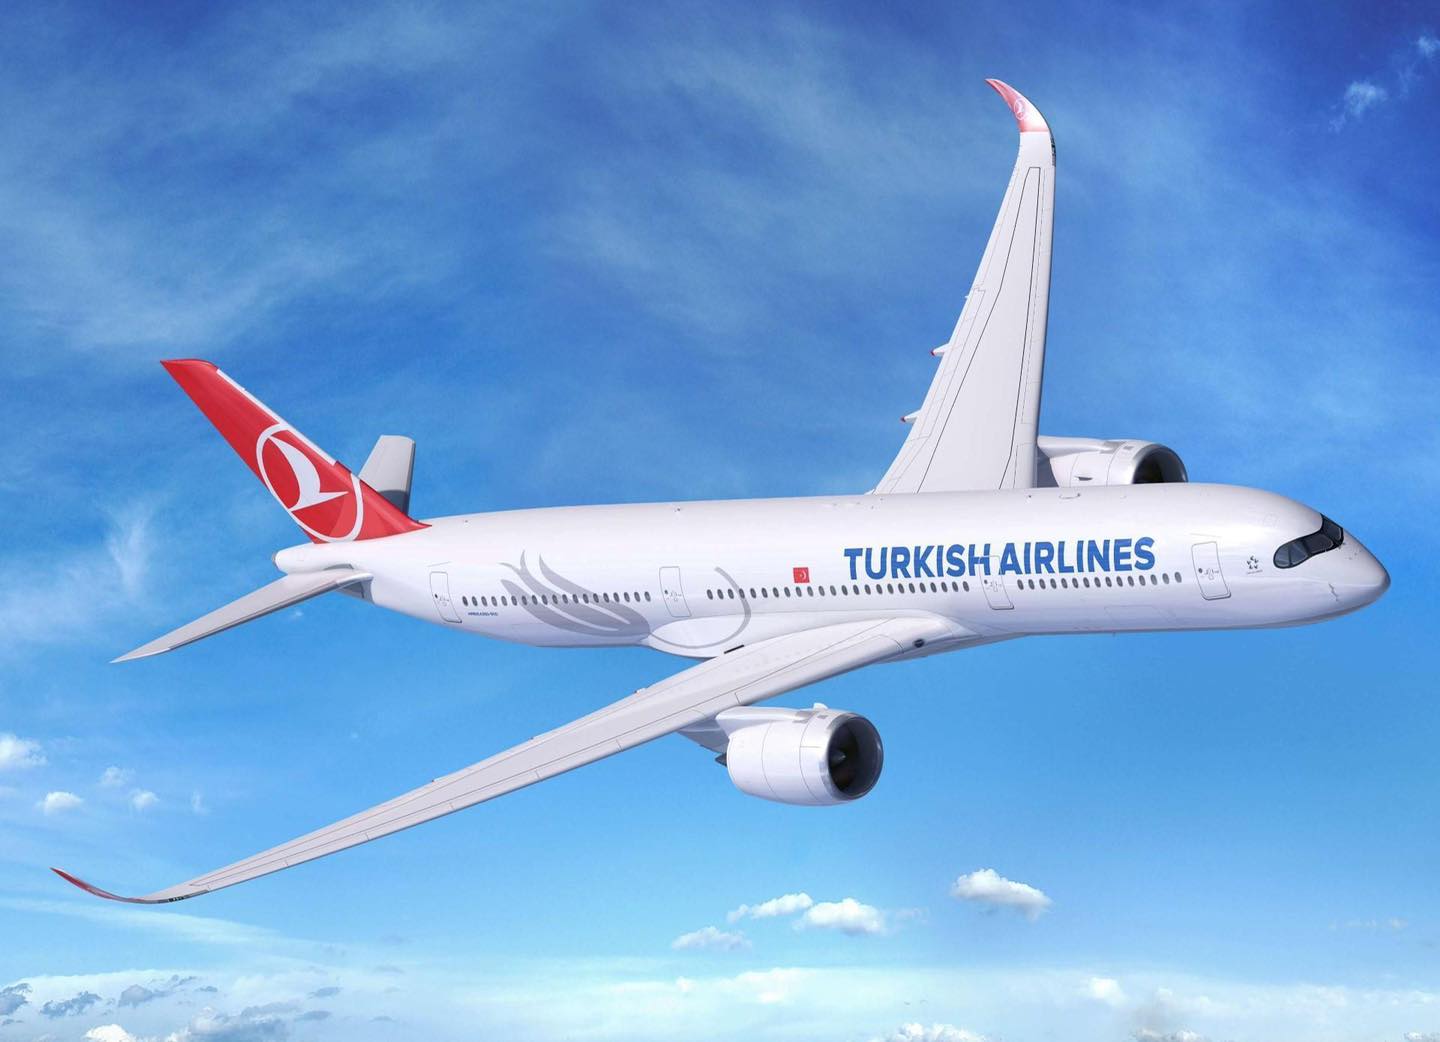 Minister of Transportation affirms the return of Turkish Airlines flights to and from Mitiga Airport.